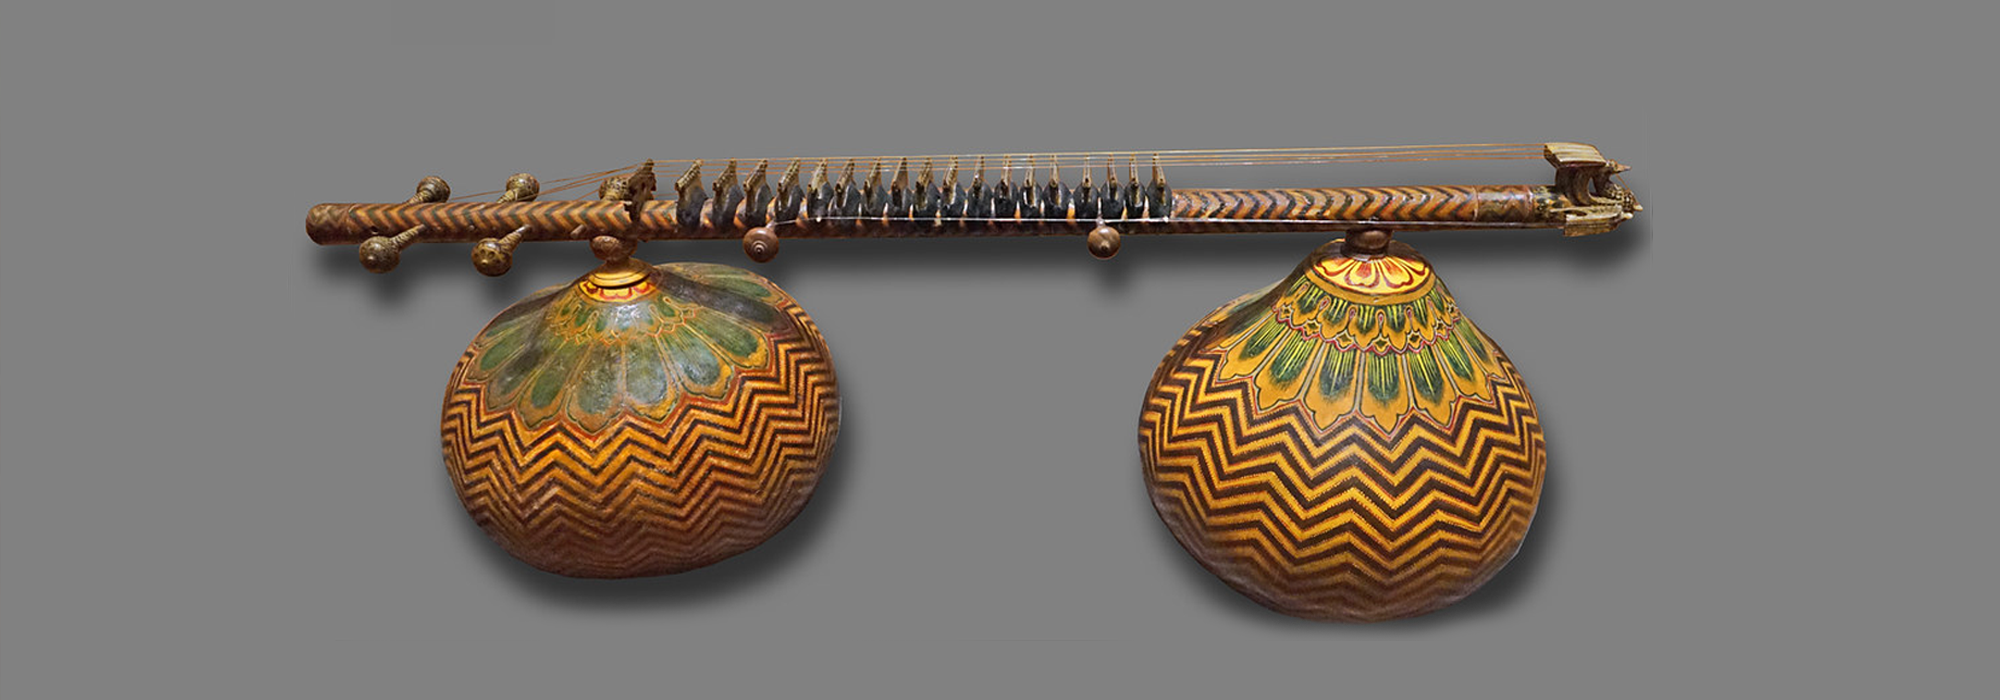 Rudra Veena, a classical string instrument